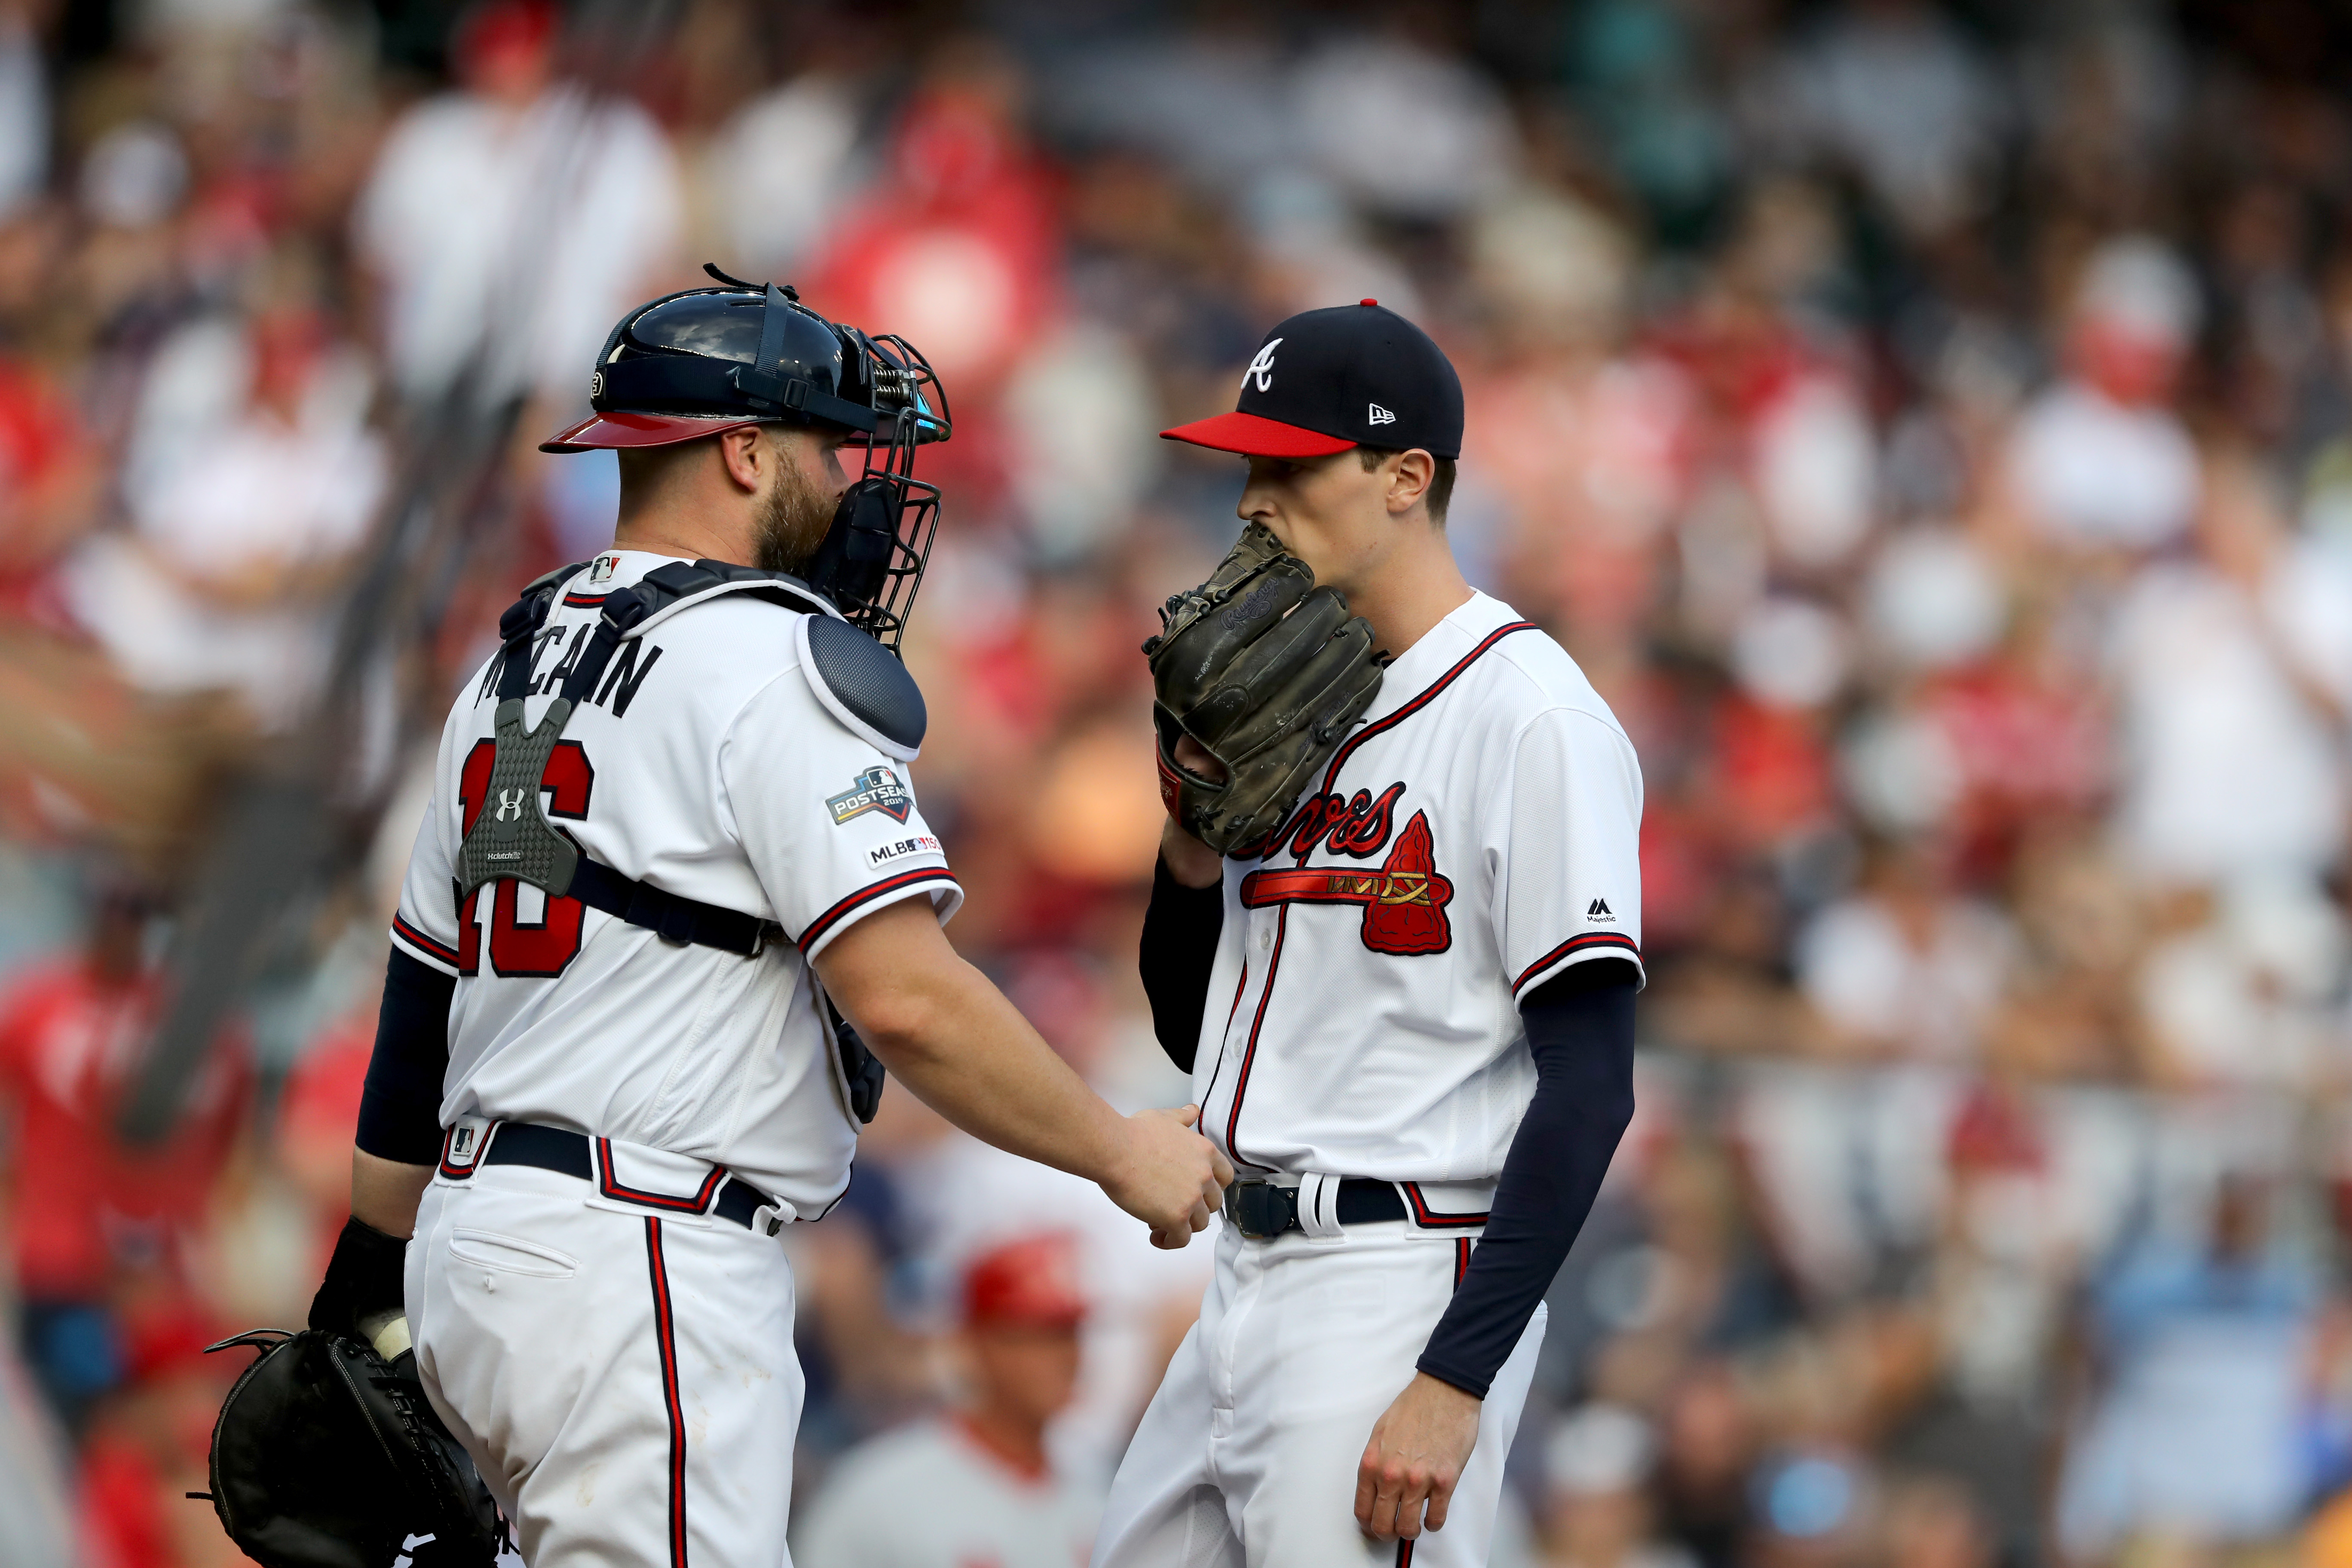 Atlanta Braves crush the Twins in Mike Foltynewicz's return to the mound